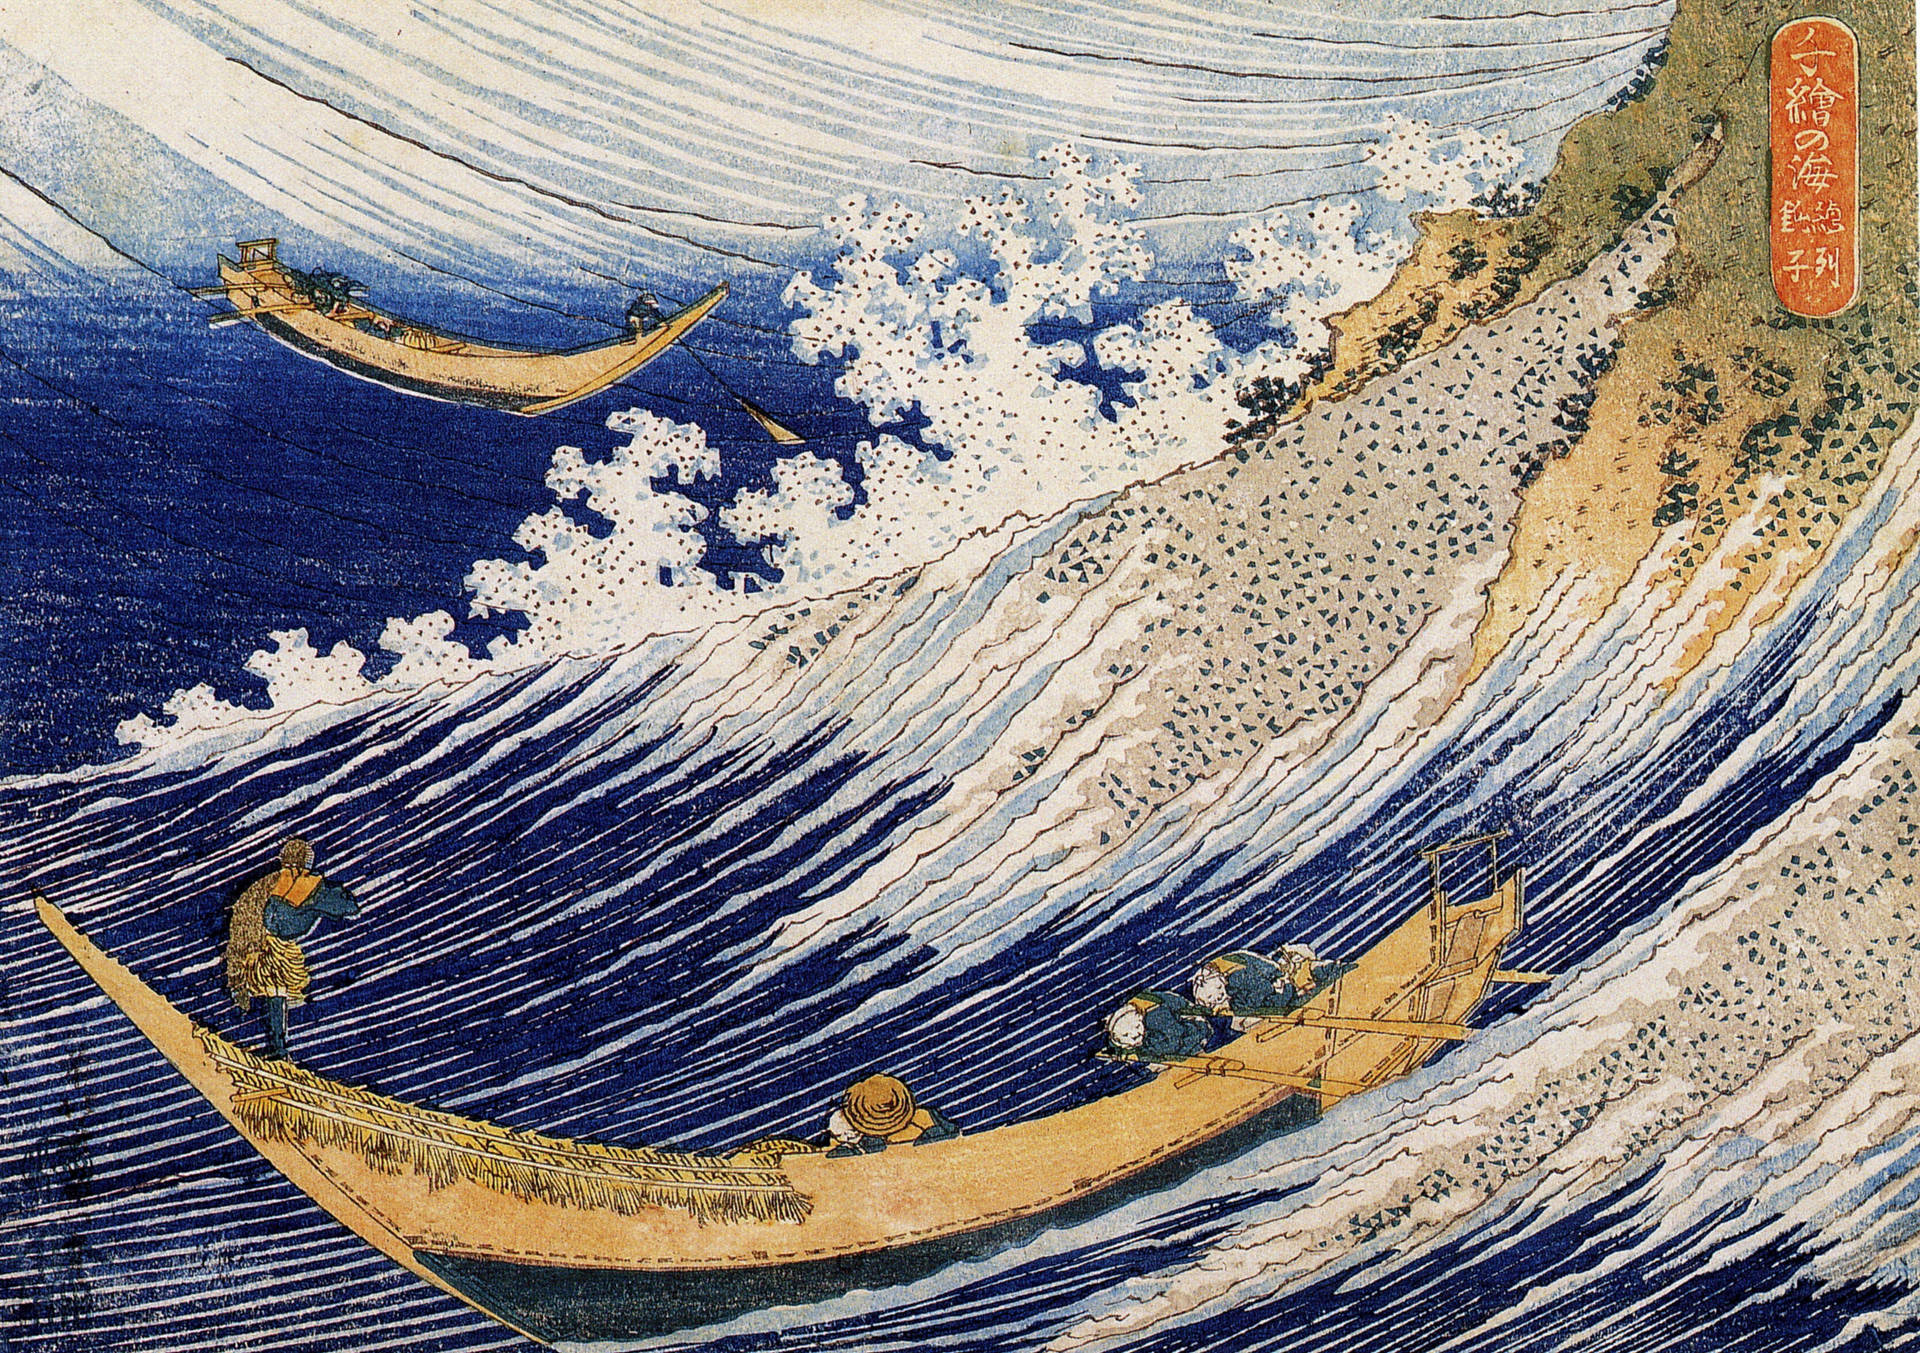 Traditional Japanese Wave Boat Painting Wallpaper